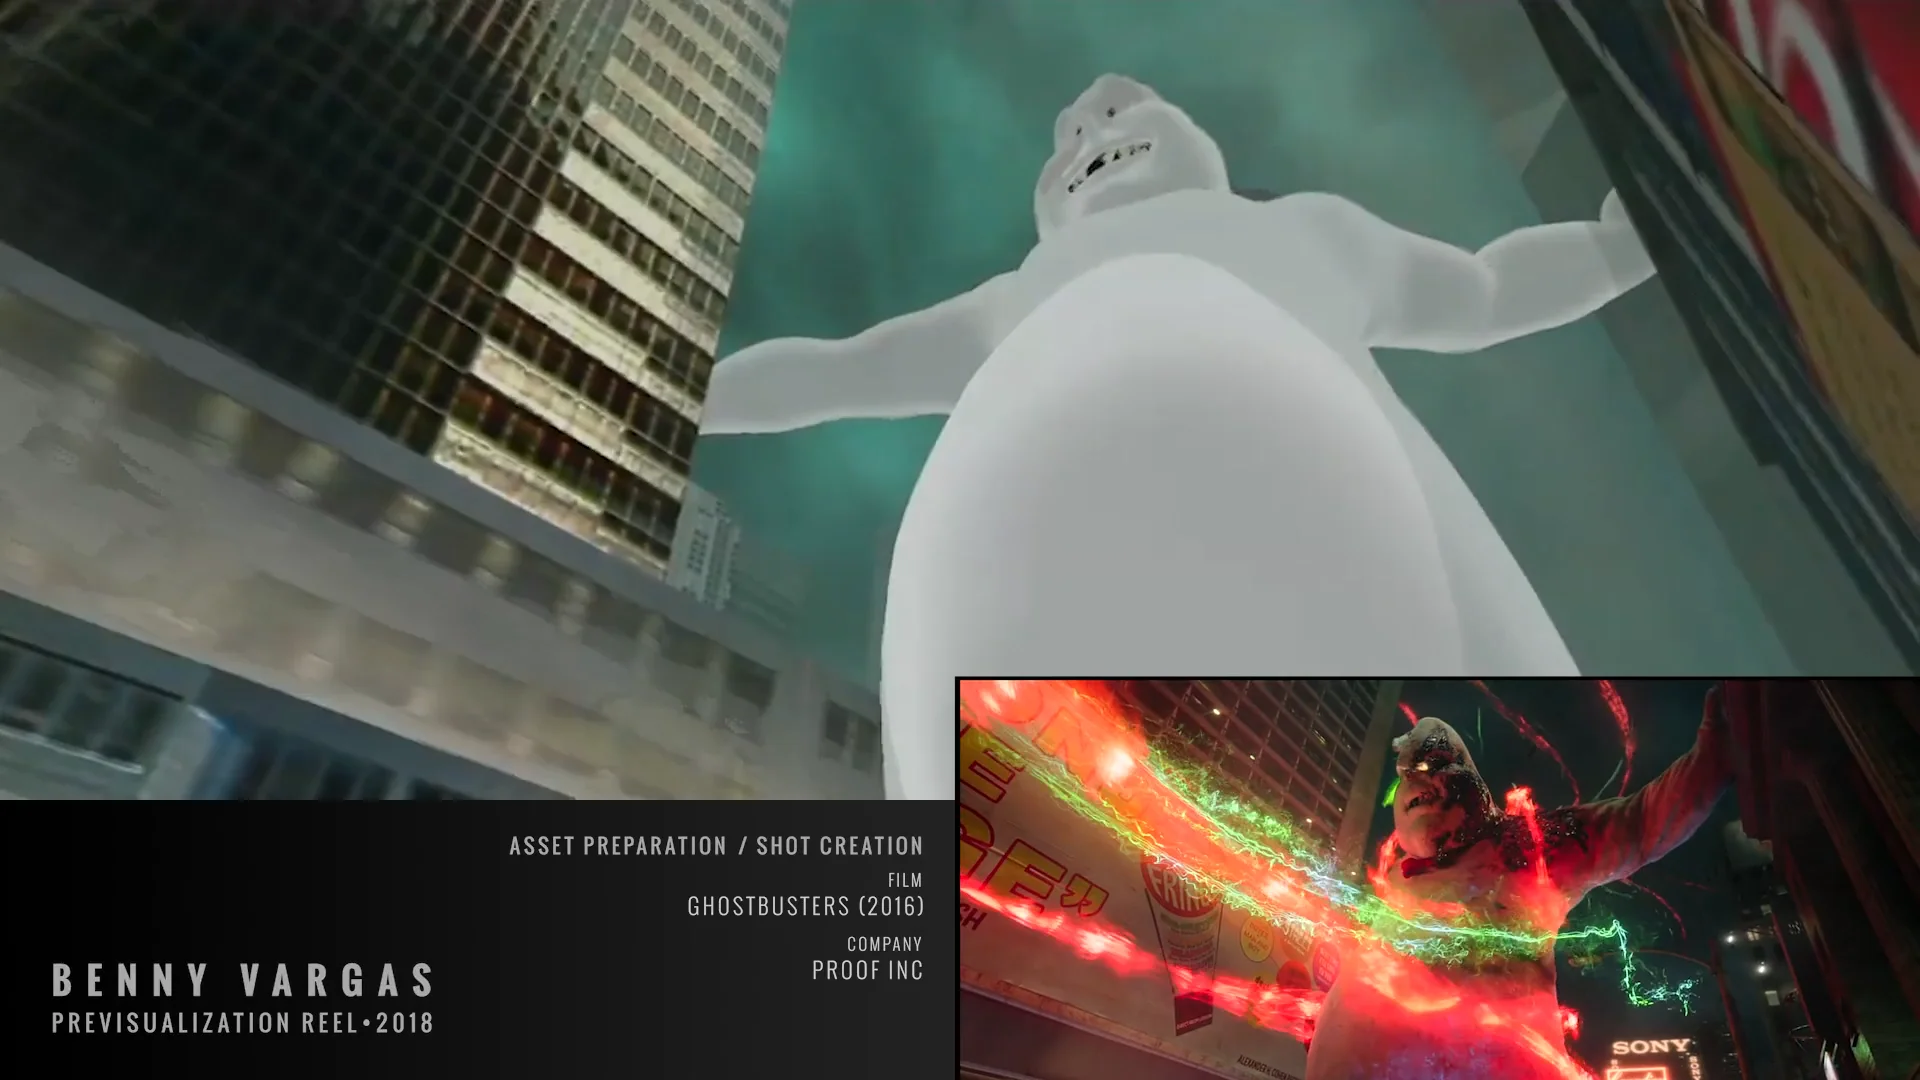 ASSET PREPARATION / SHOT CREATION

iv]
GHOSTBUSTERS (2016)
COMPANY

BENNY VARGAS PROOF INC

PREVISUALIZATION REEL-2018